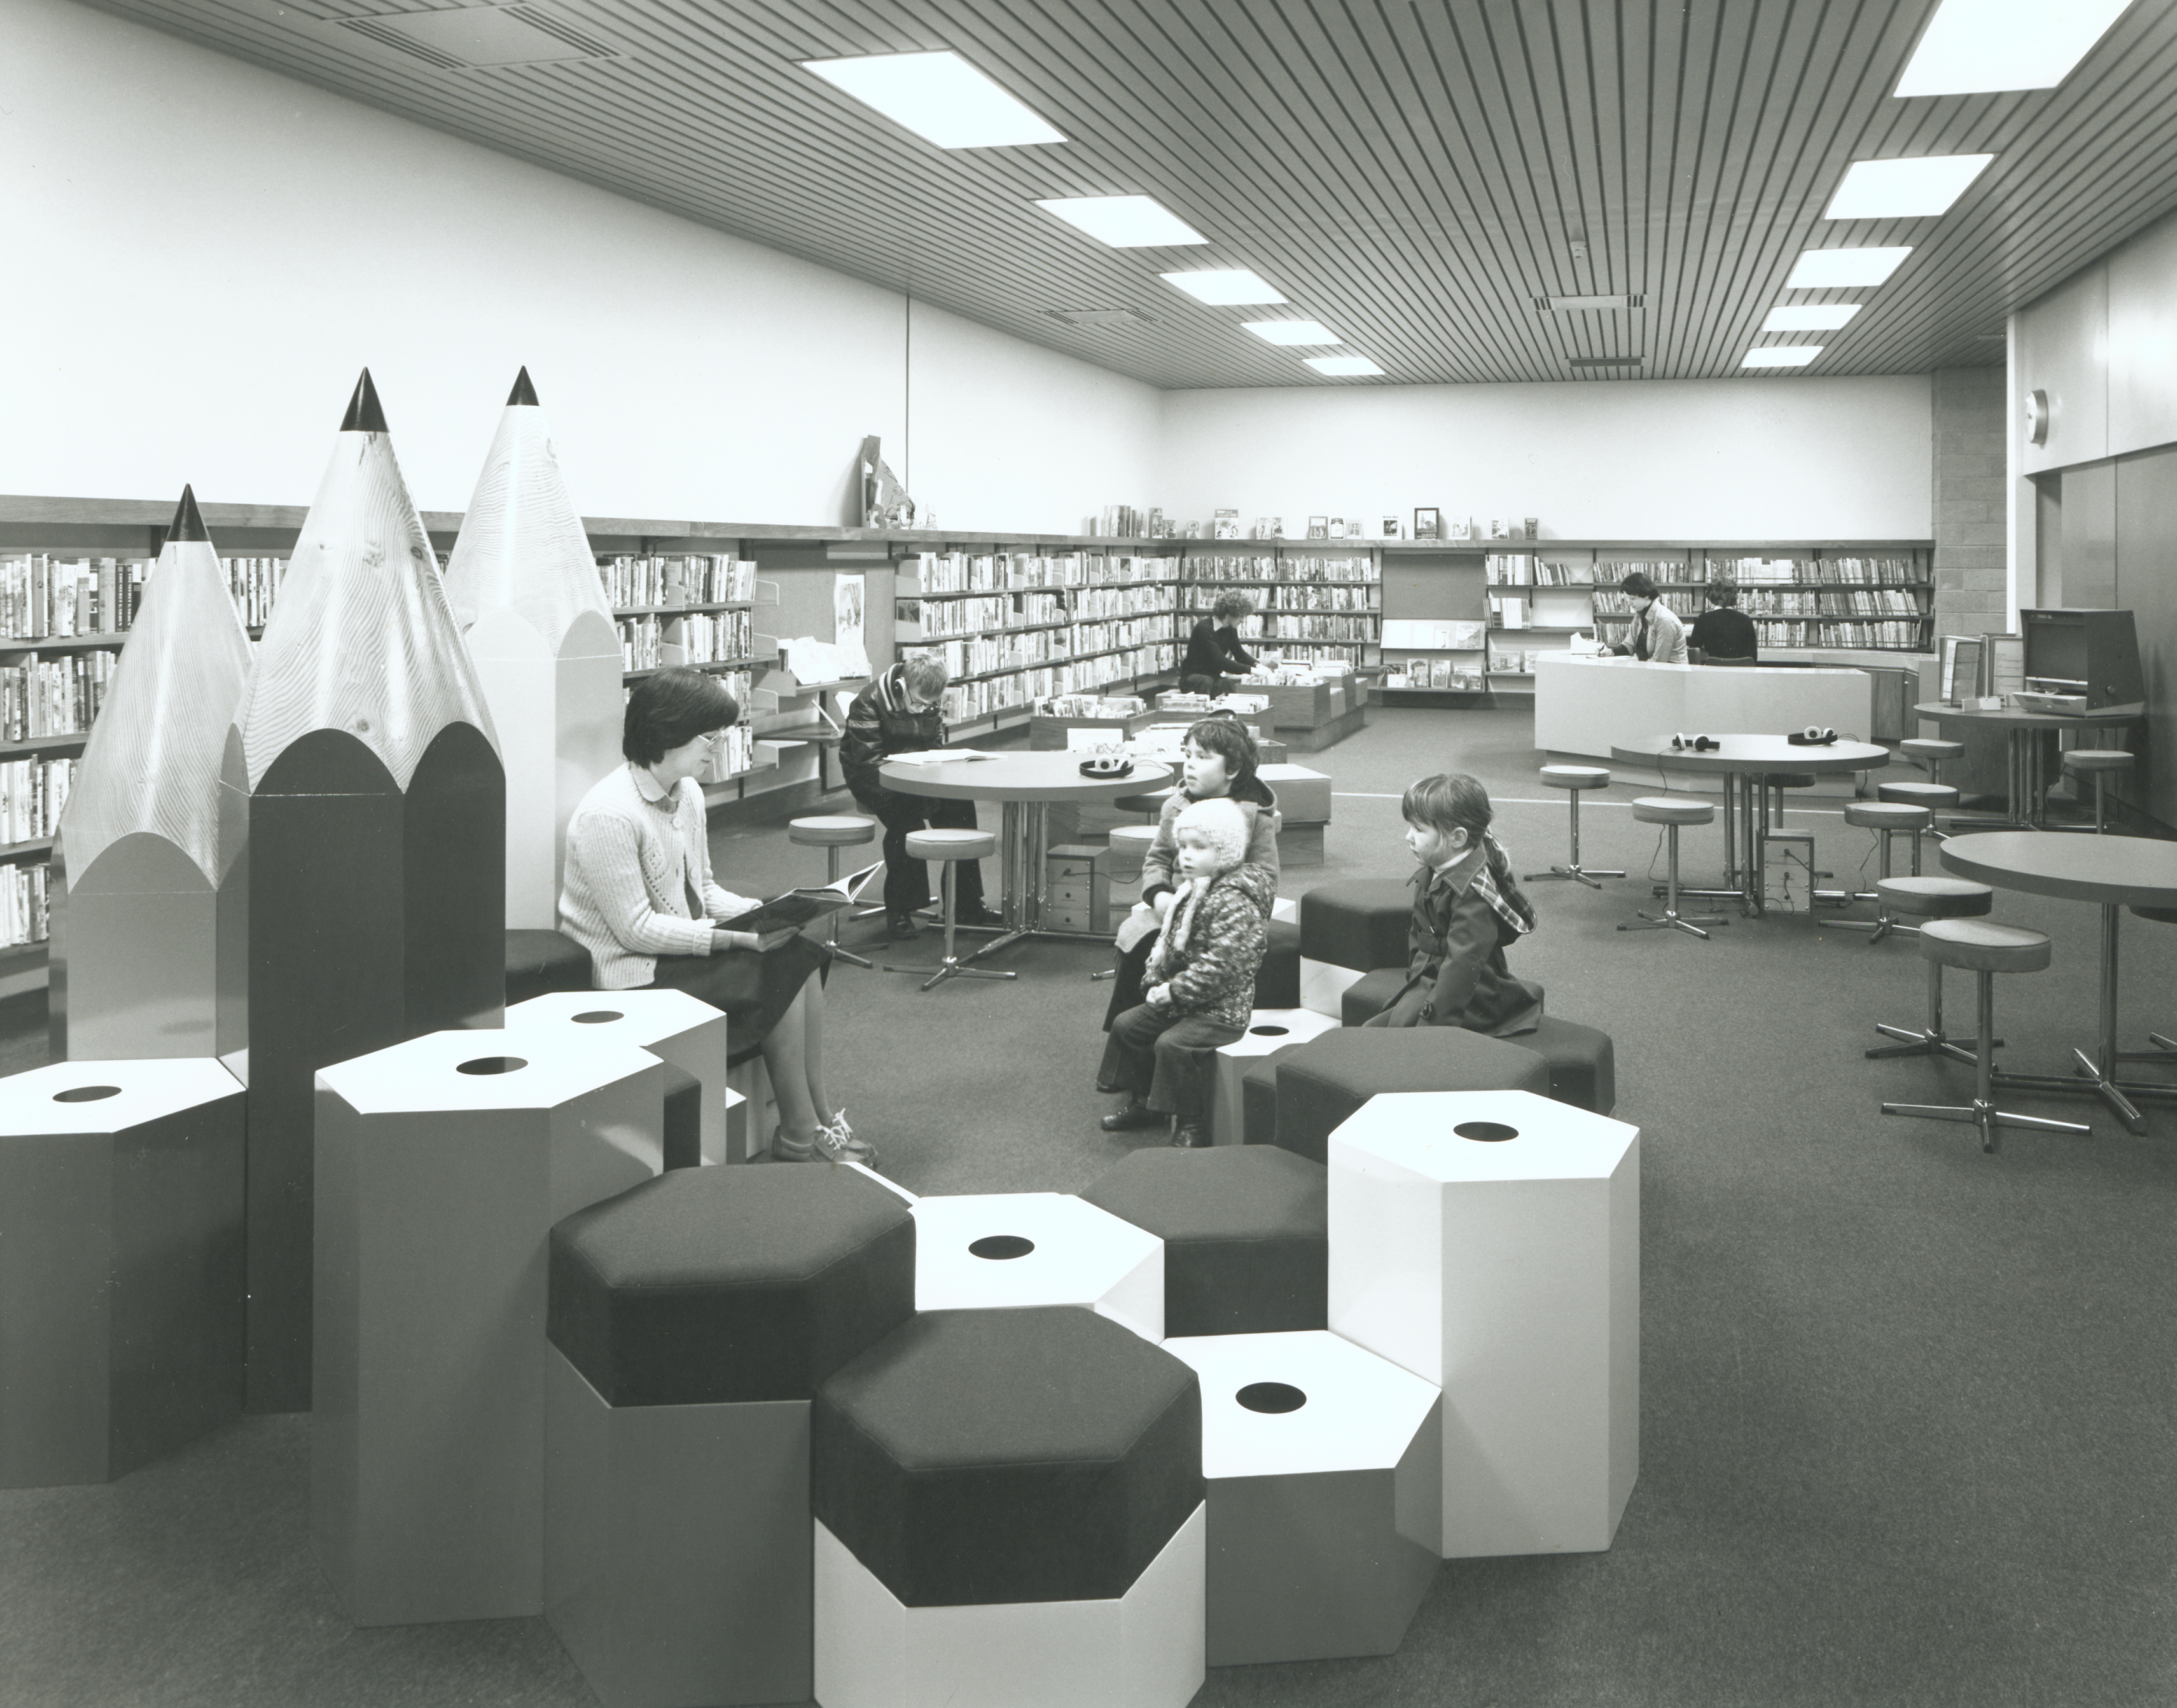 A picture of the children's library in the 1980s